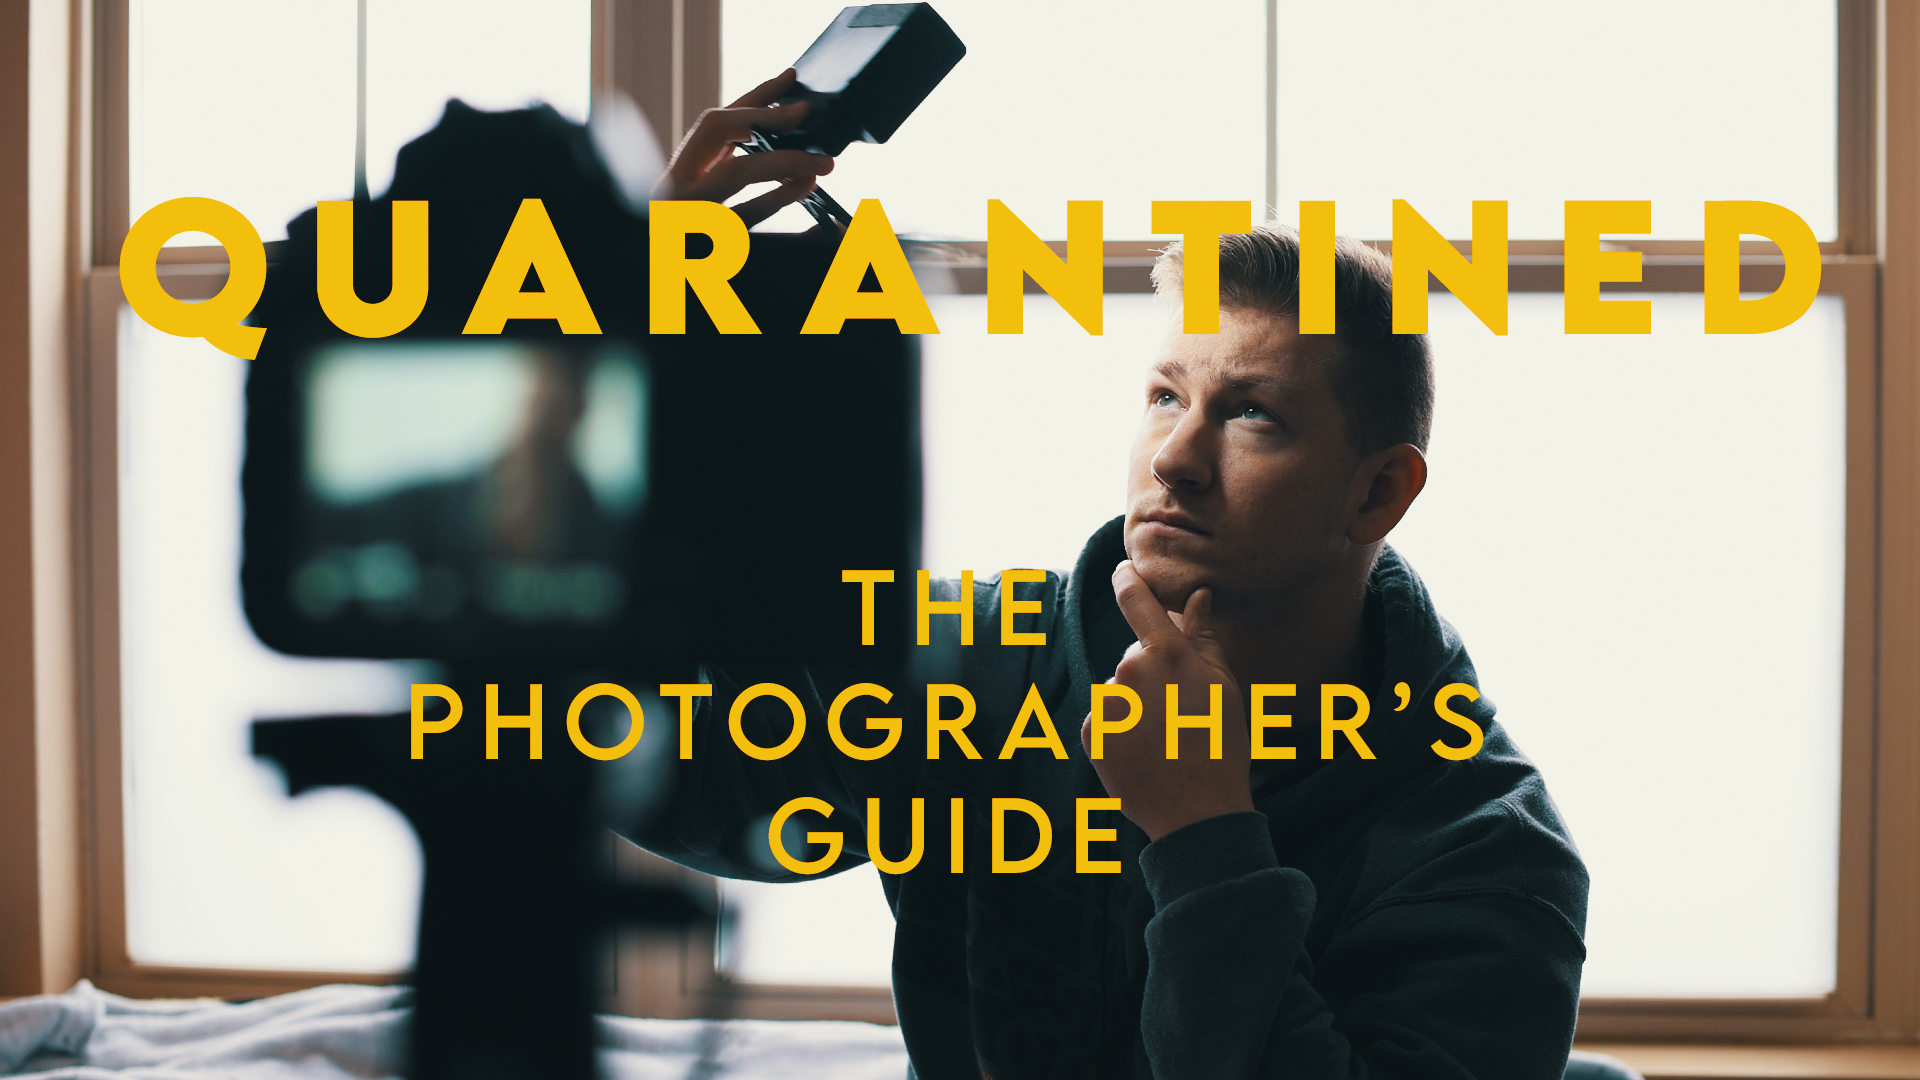 You are currently viewing Quarantined: The Photographer’s Guide